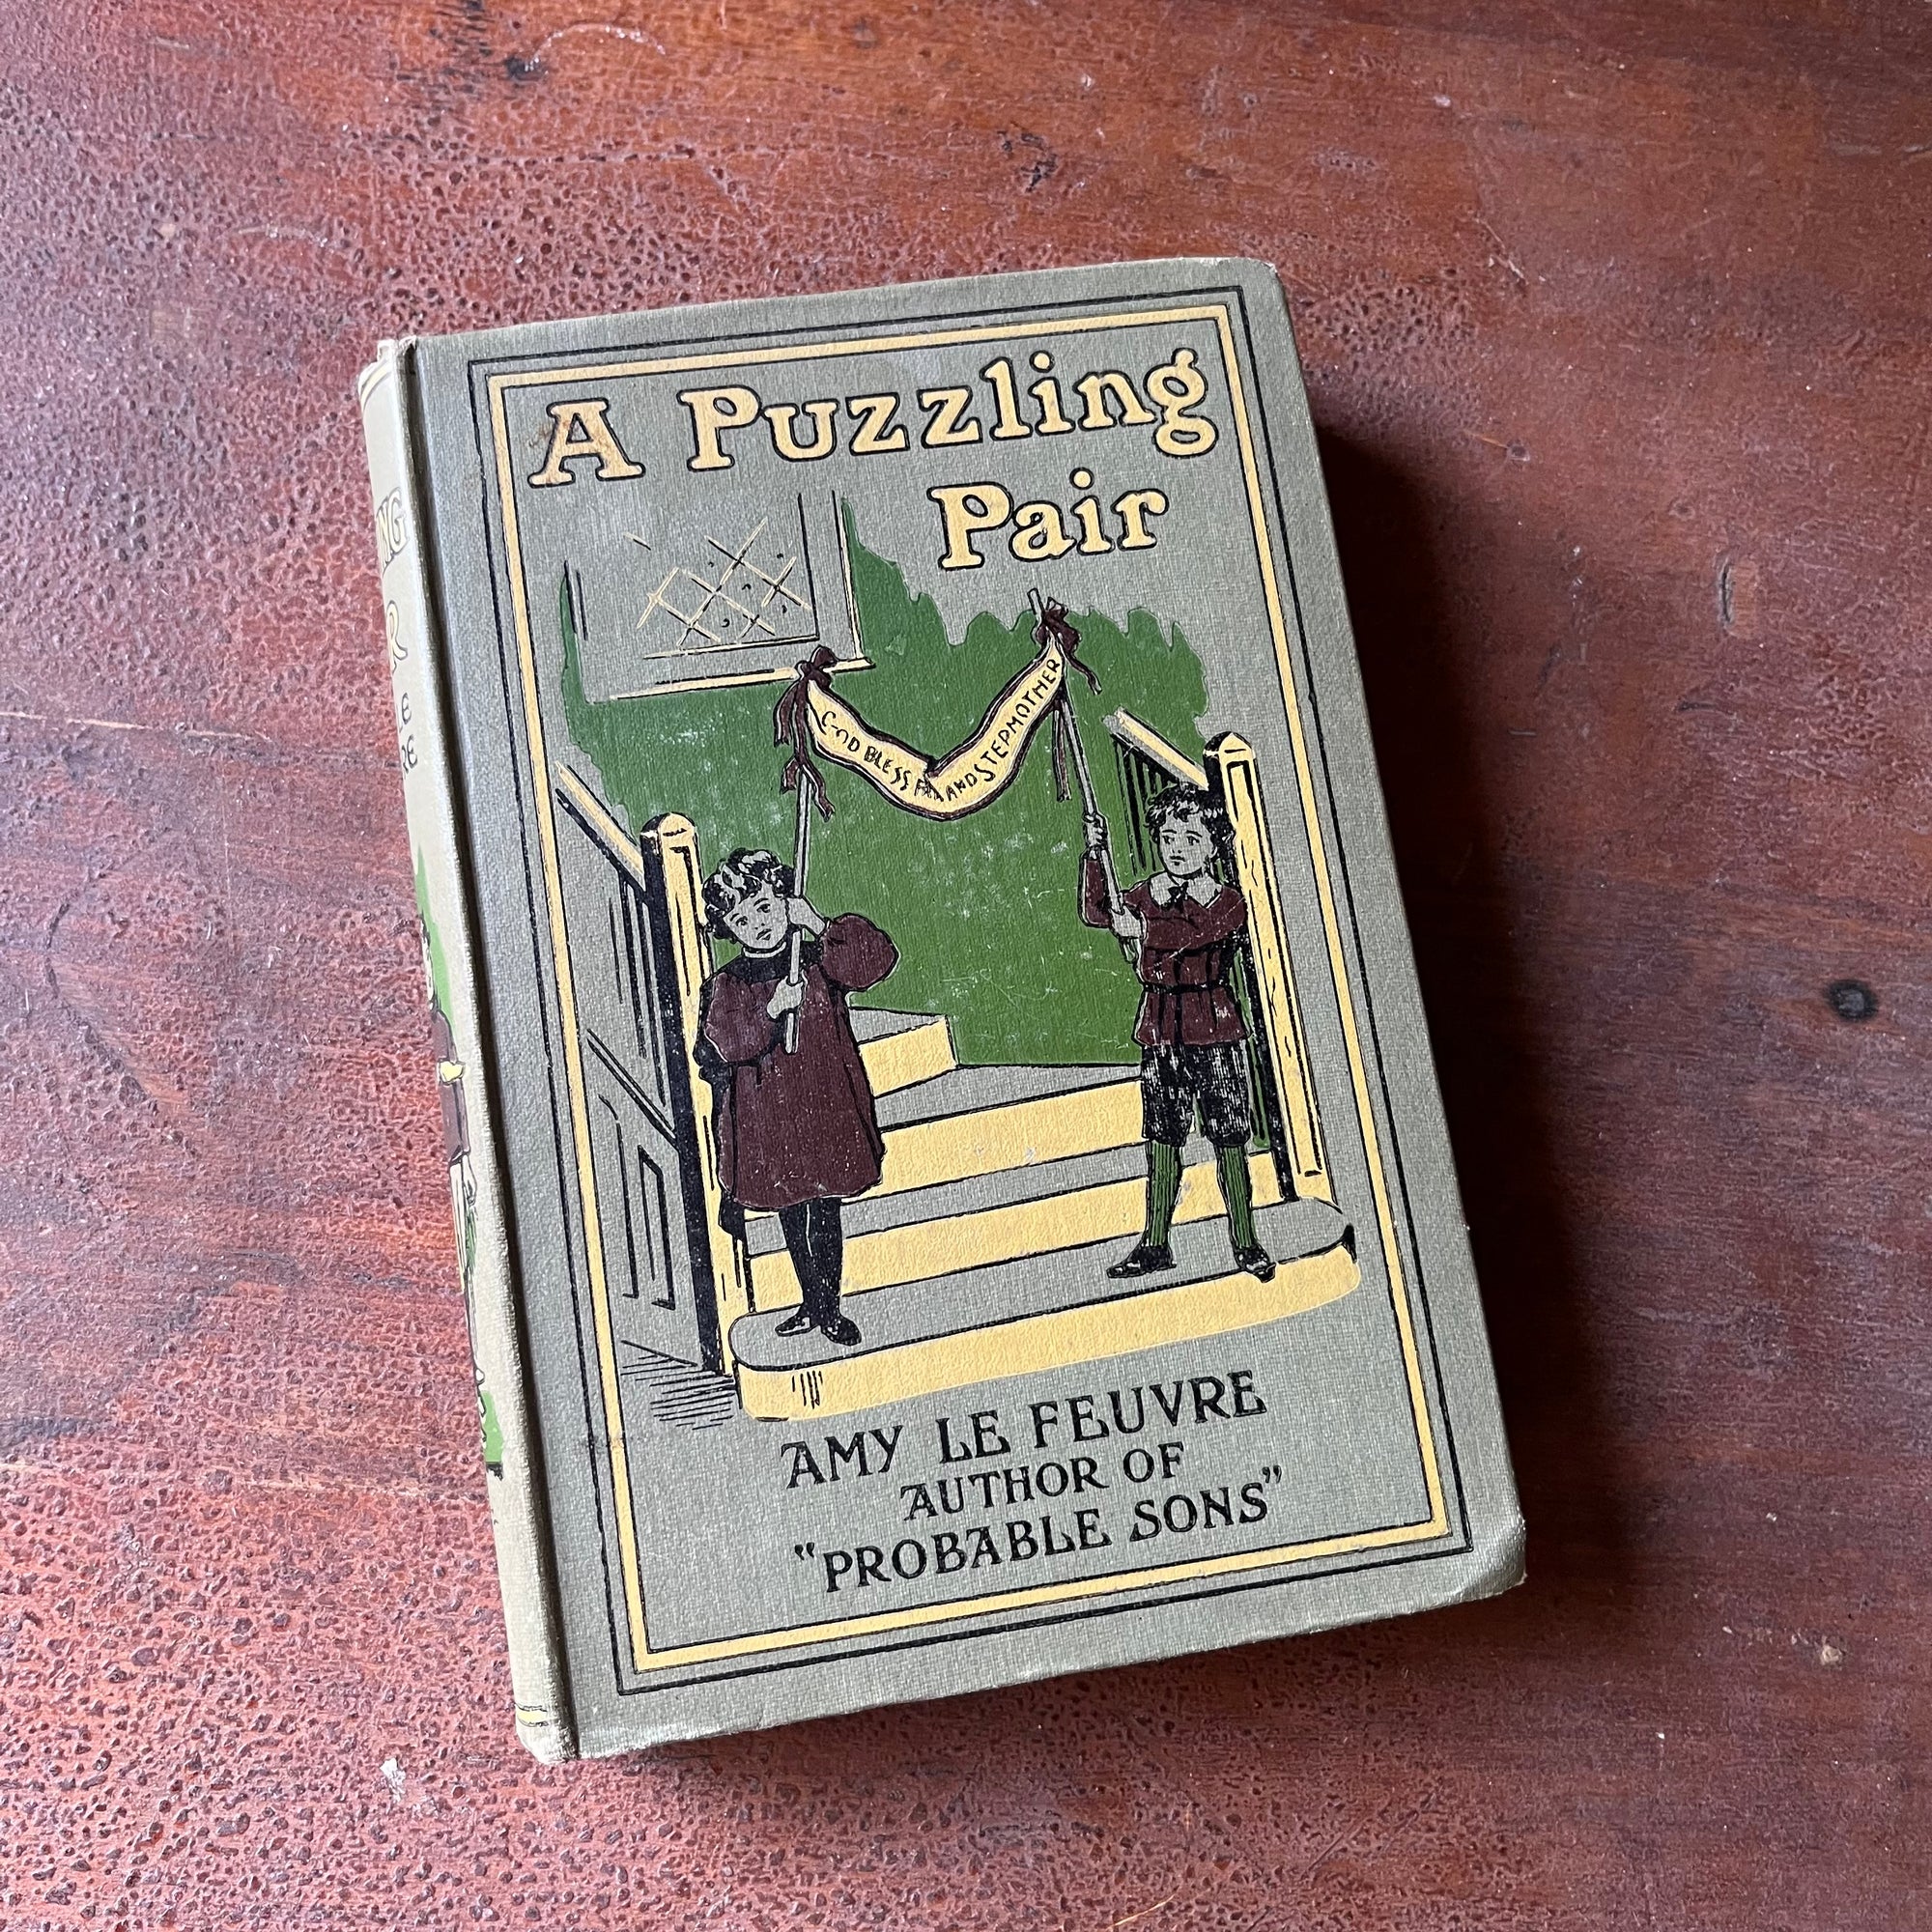 A Puzzling Pair by Amy Le Feuvre - view of the front cover